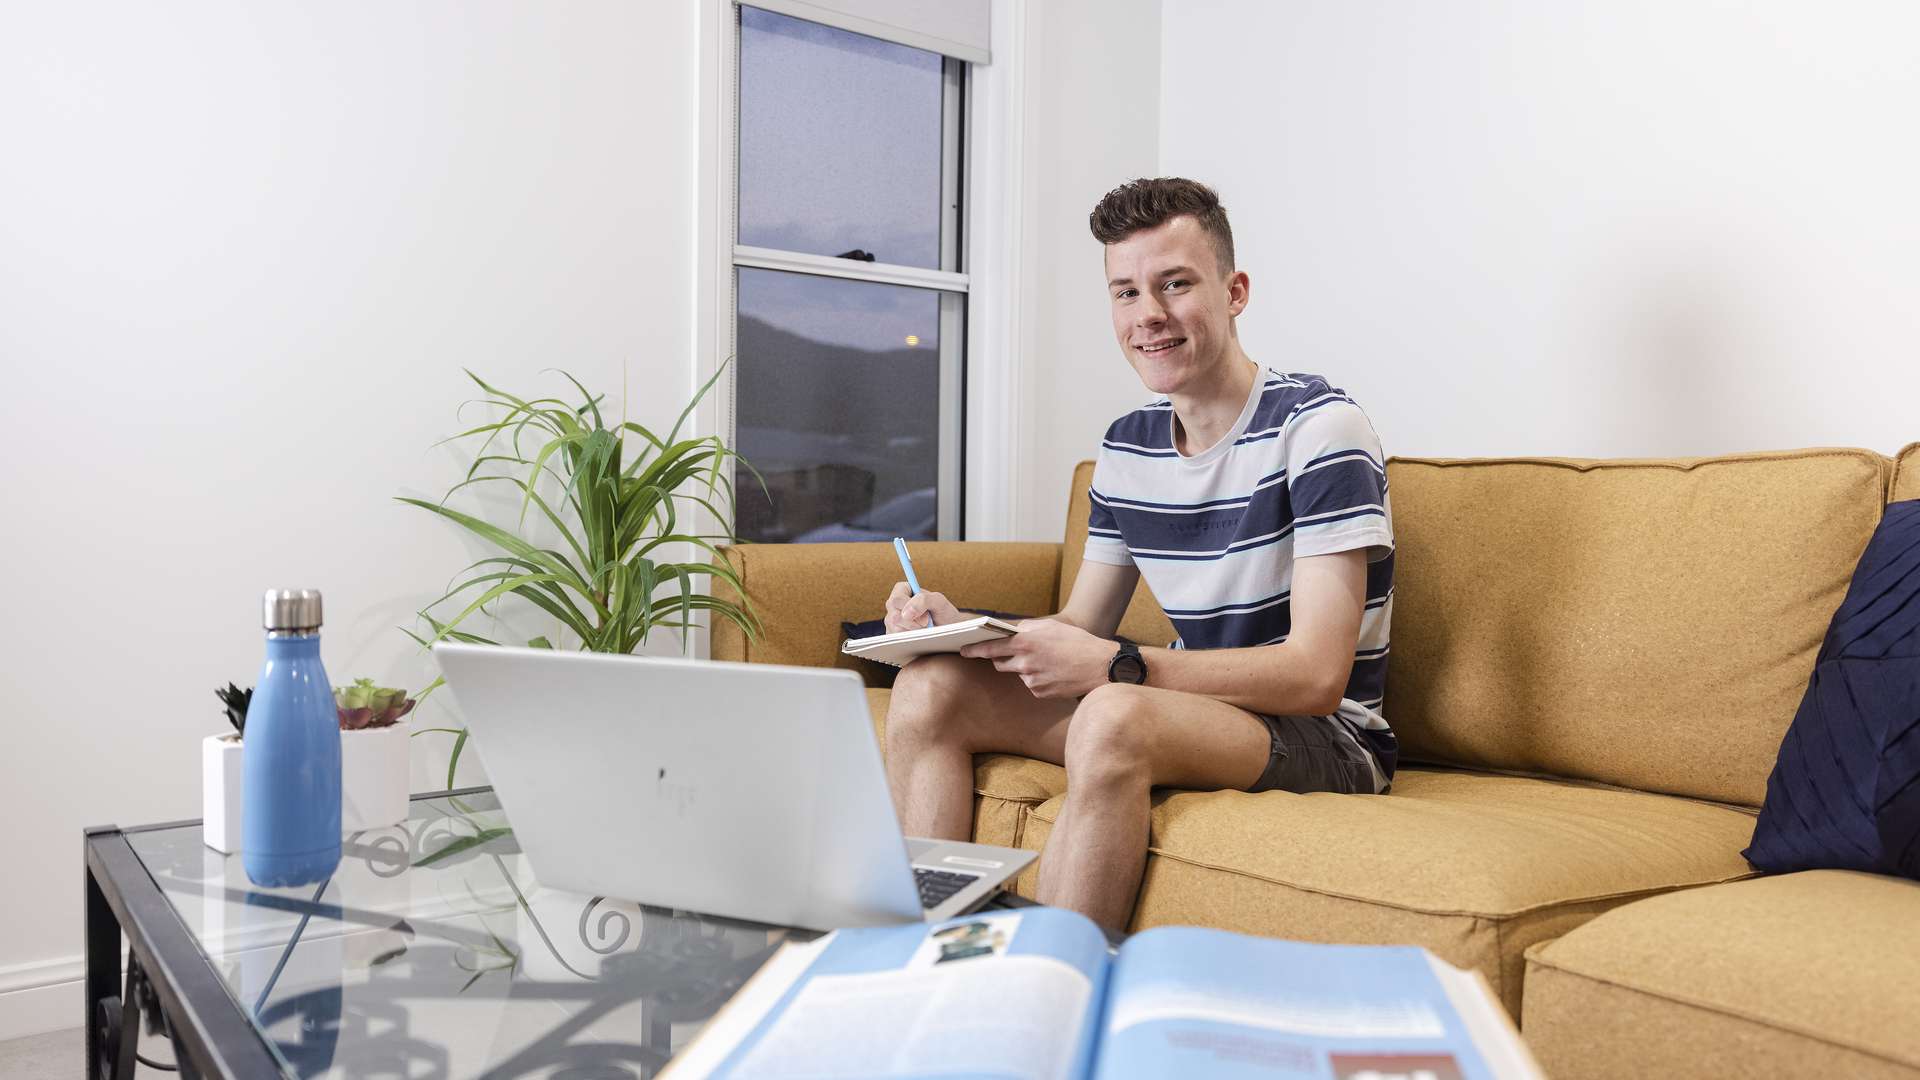 Man studying on a lounge at home.